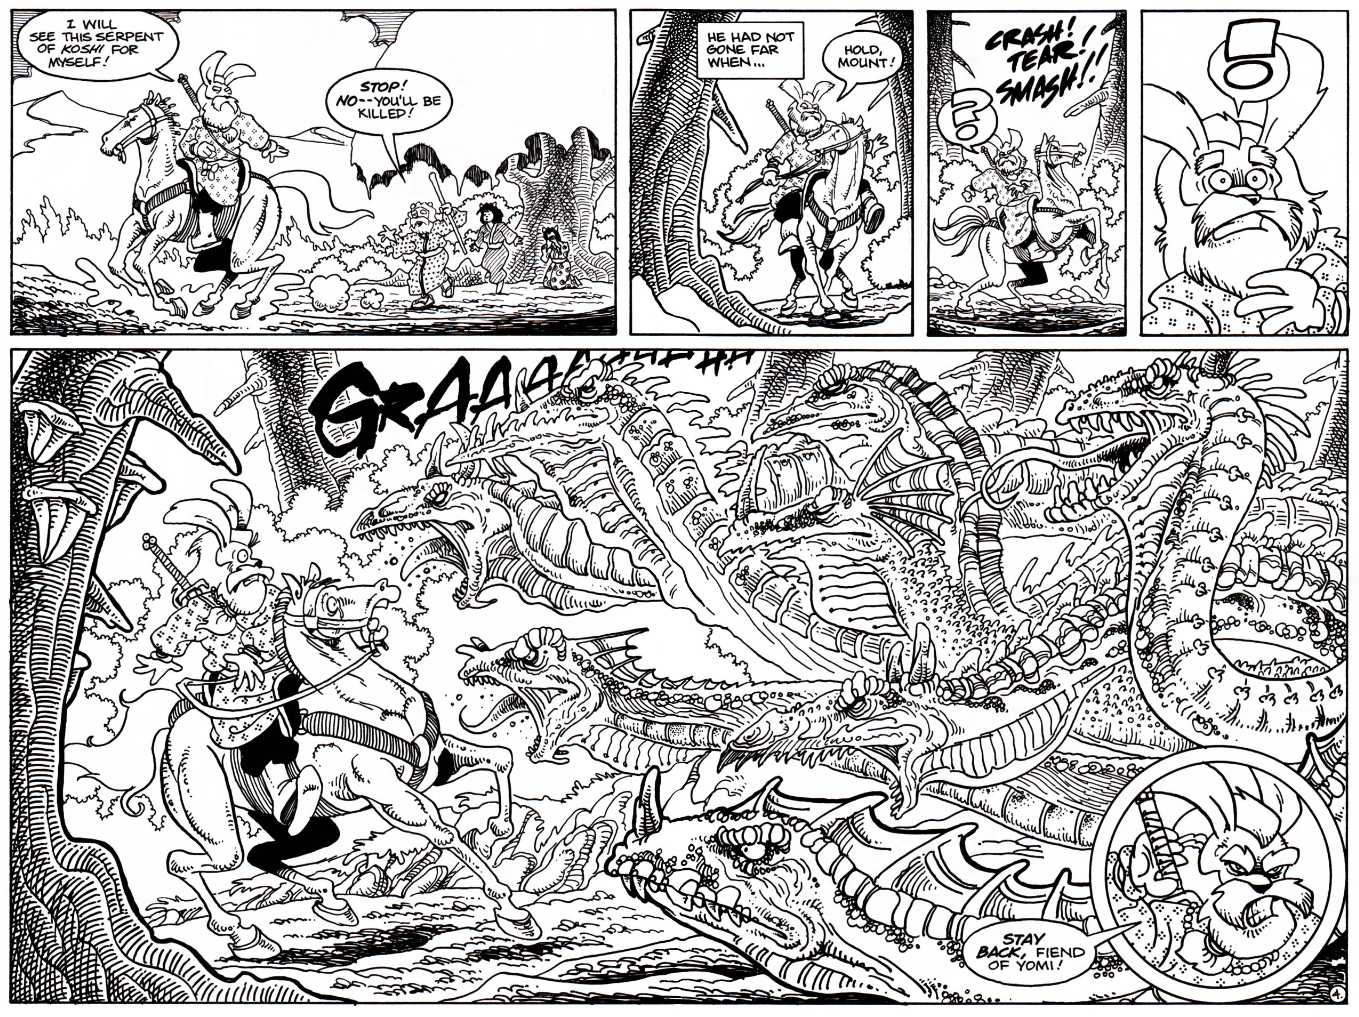 Spread from Usagi Yojimbo comic in which Susan-o leaves to find a serpent is startled by it in the woods is terrified but then fights back